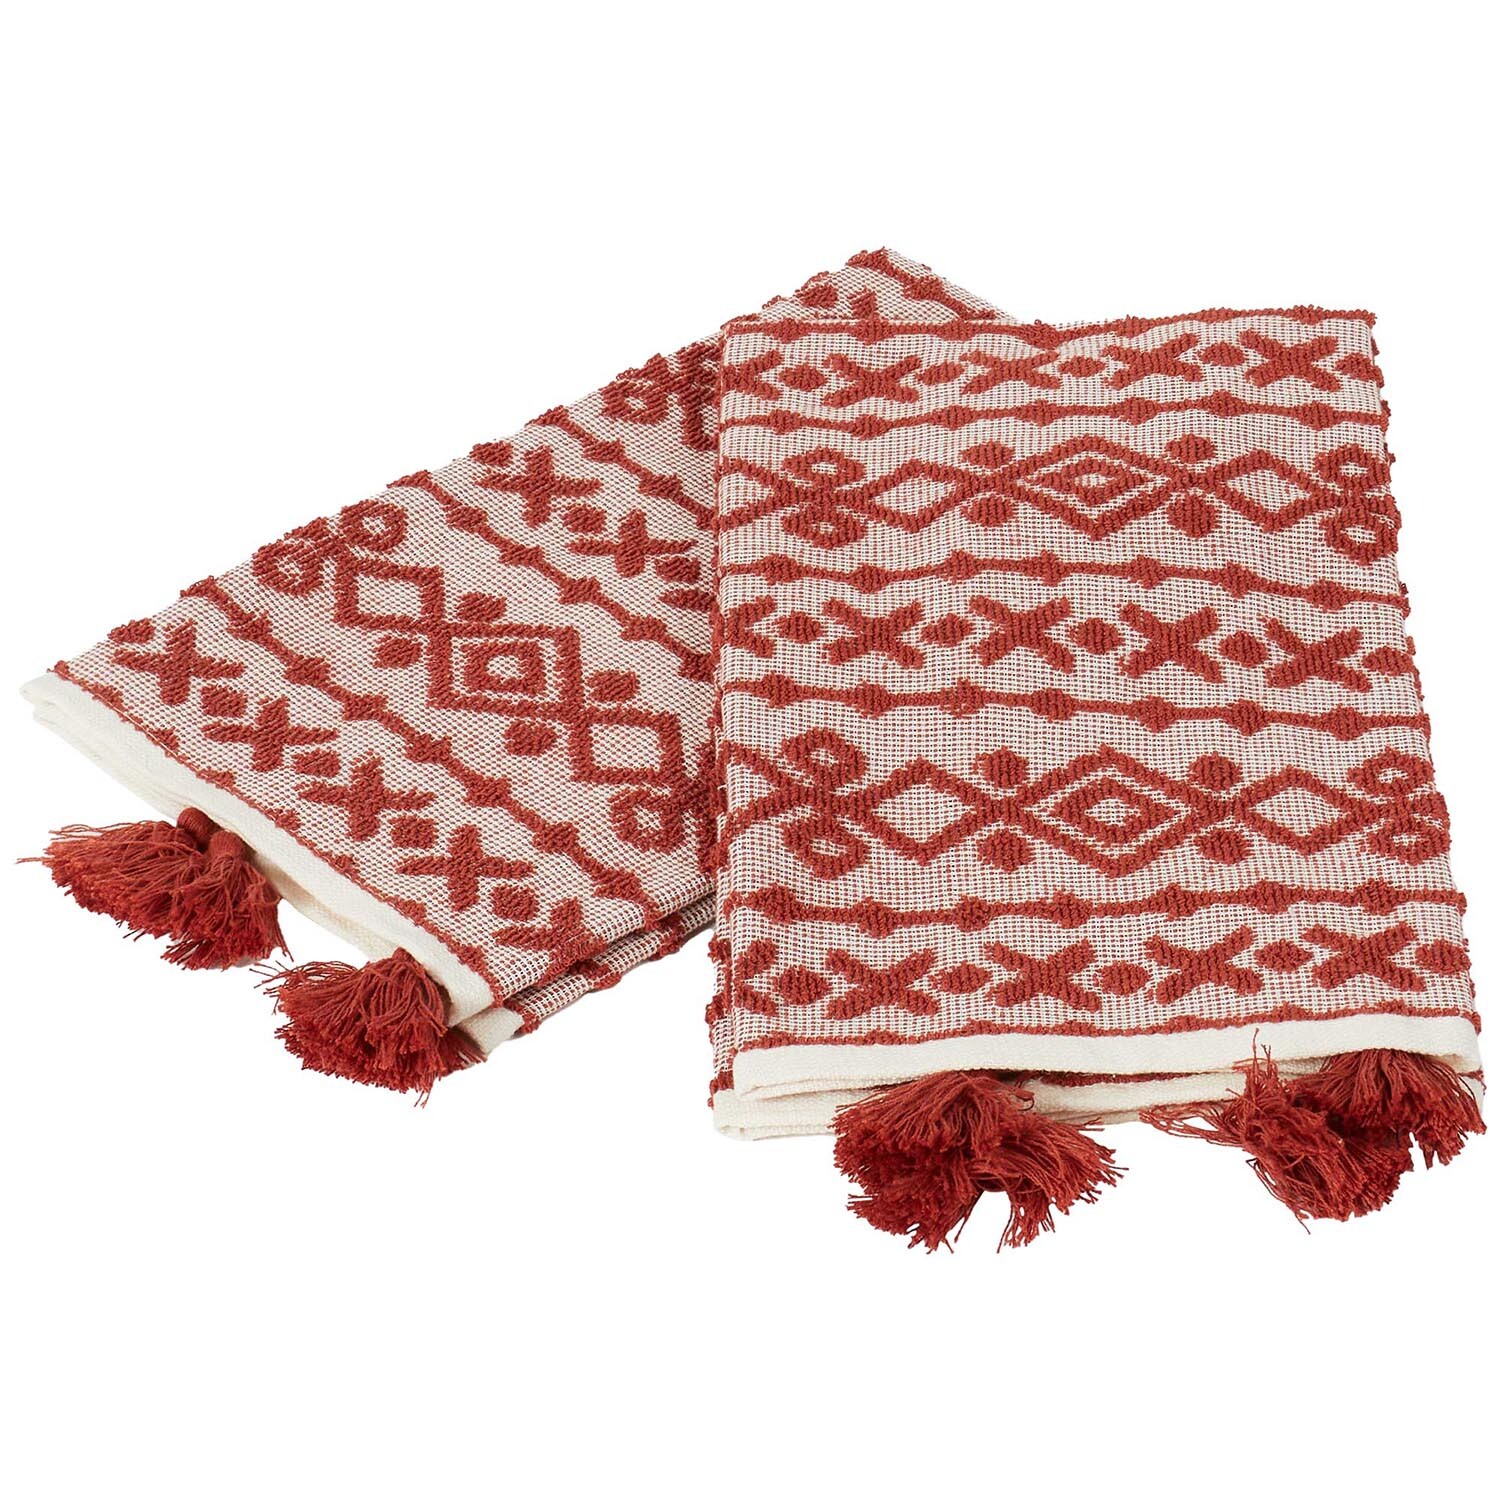 Pack of 2 Jacquard Terry Kitchen Towels with Tassels - Burnt Orange Image 5